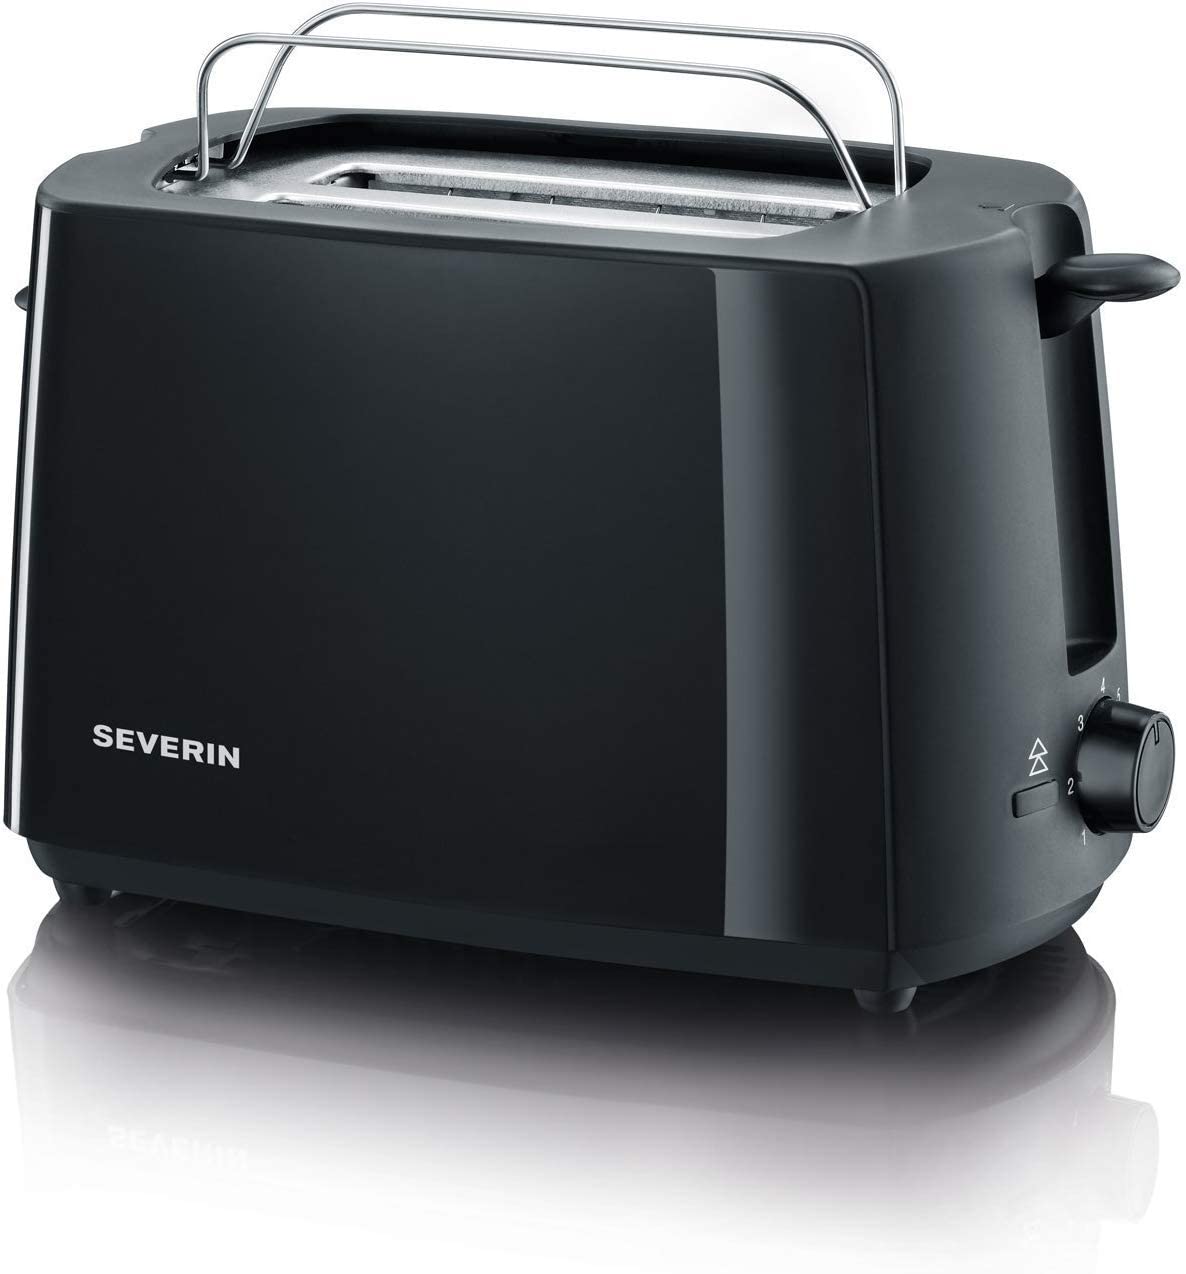 SEVERIN Automatic Toaster, Approx. 700 W, Integrated Bun Toasting Attachment, Adjus